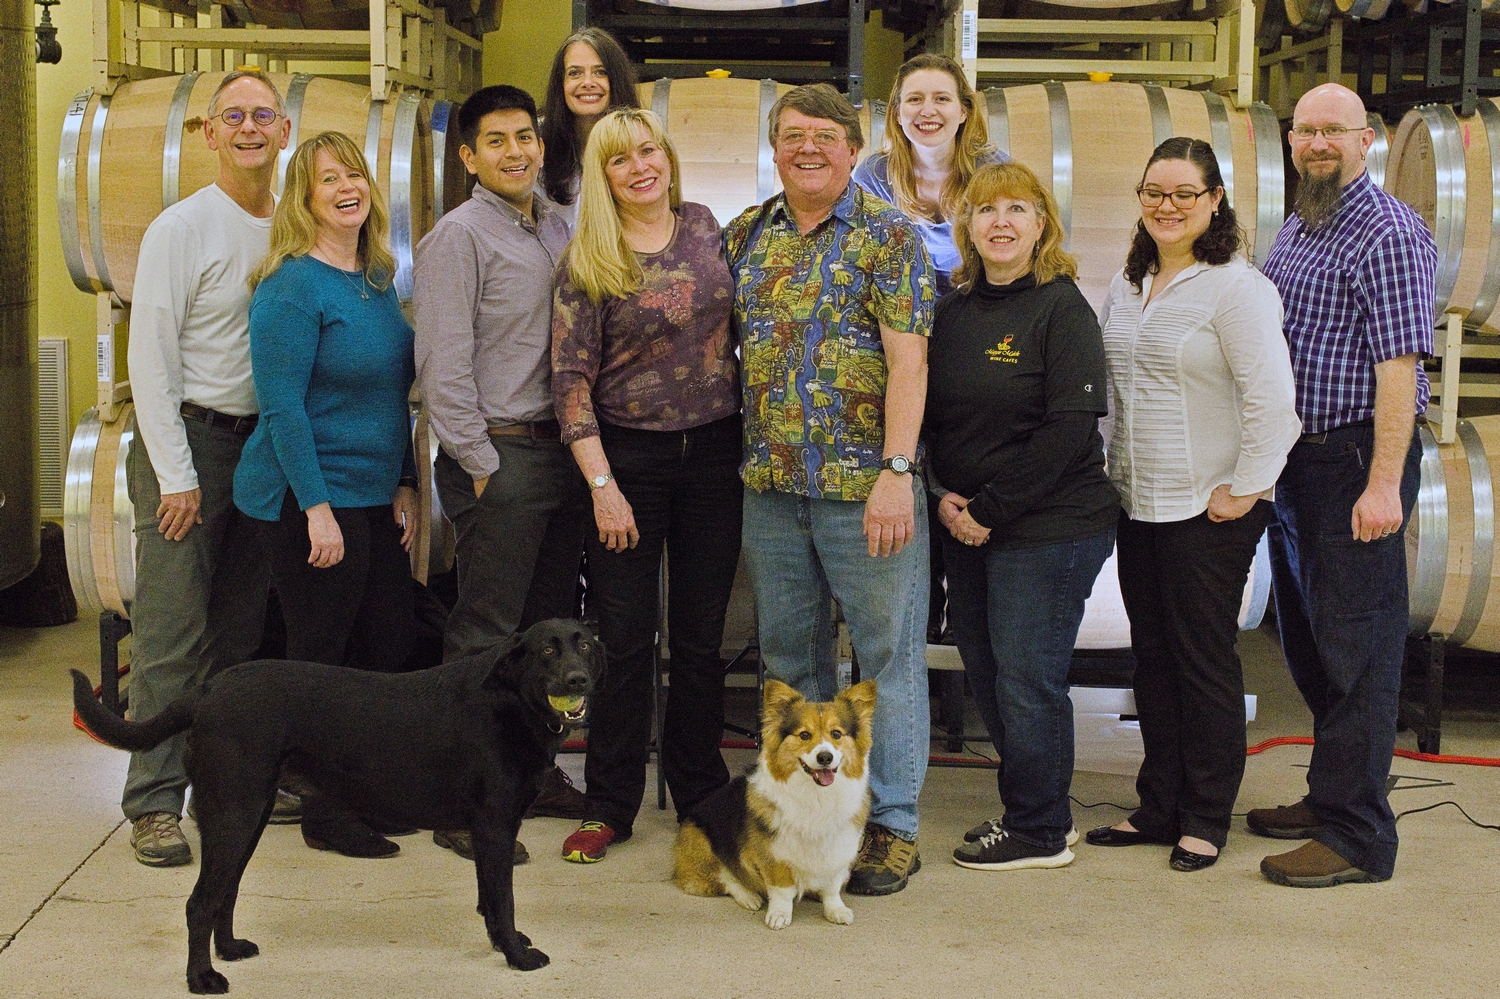 Group picture of employees at Maggie Malick wine caves along with two dogs